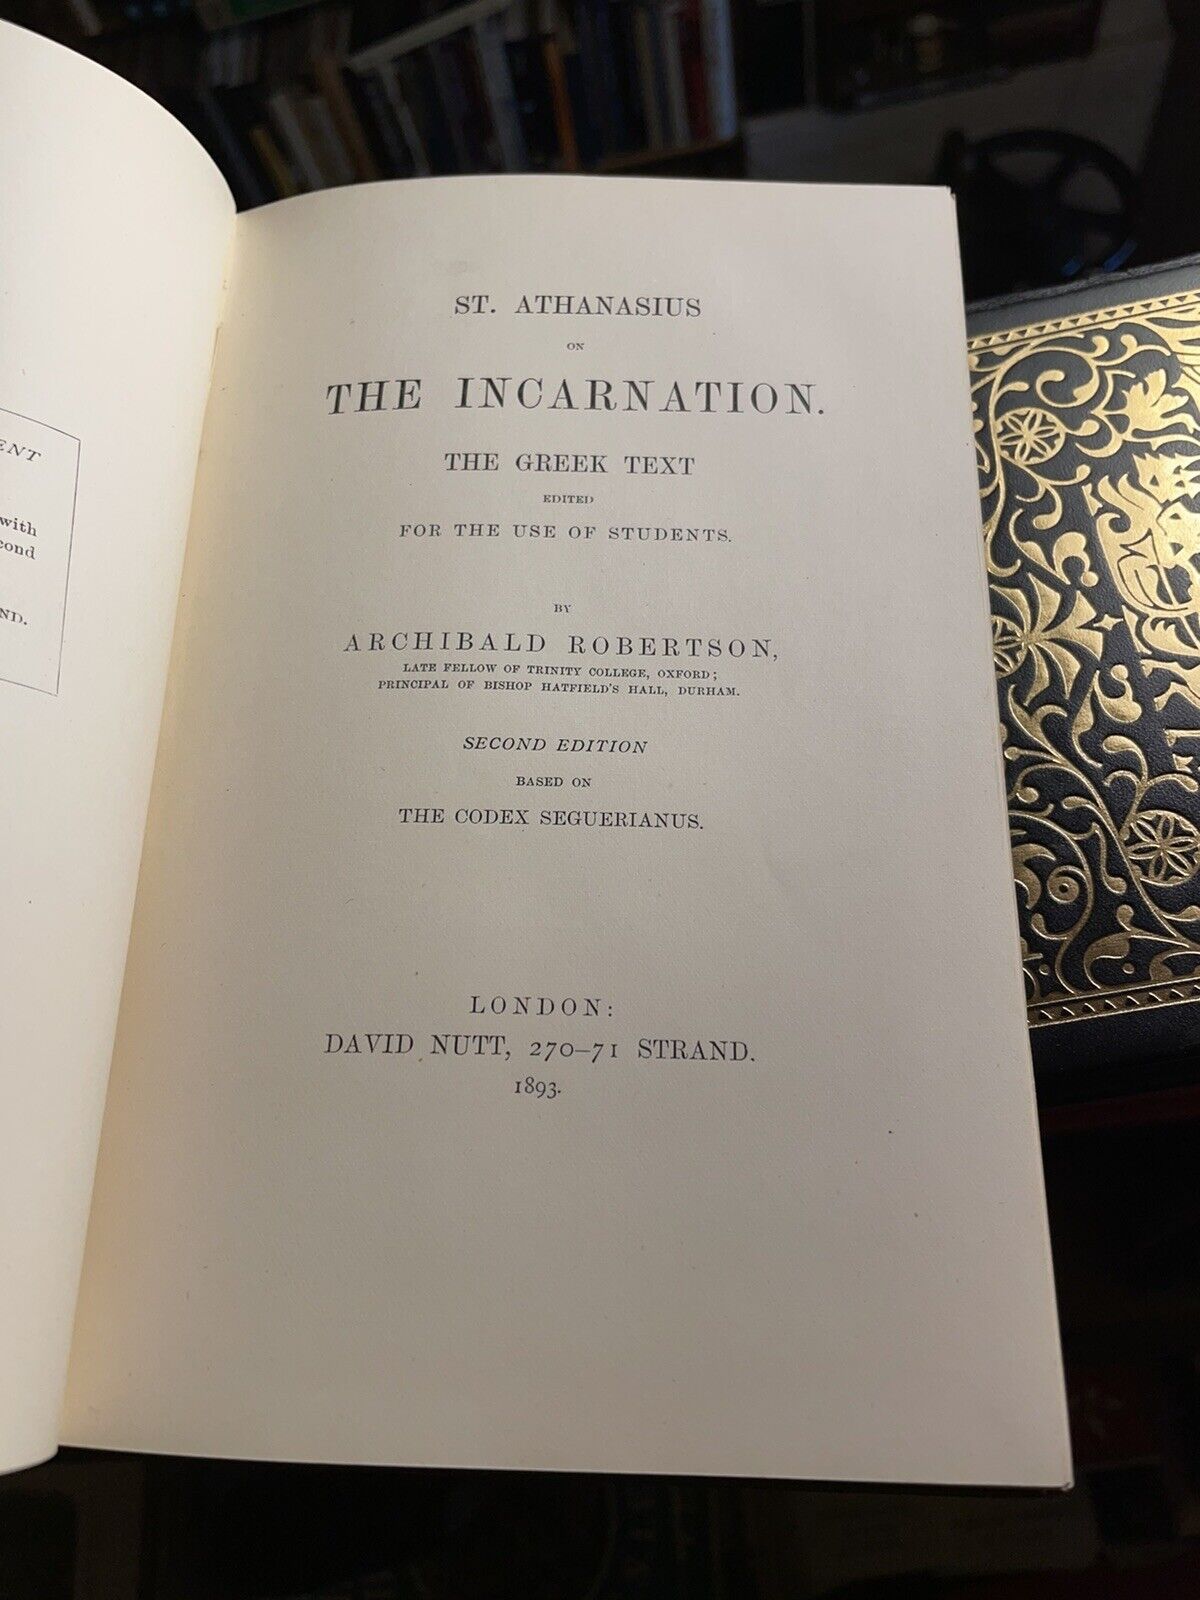 1895 :  St. Athanasius on the Incarnation : The Greek Text, Edited for Students